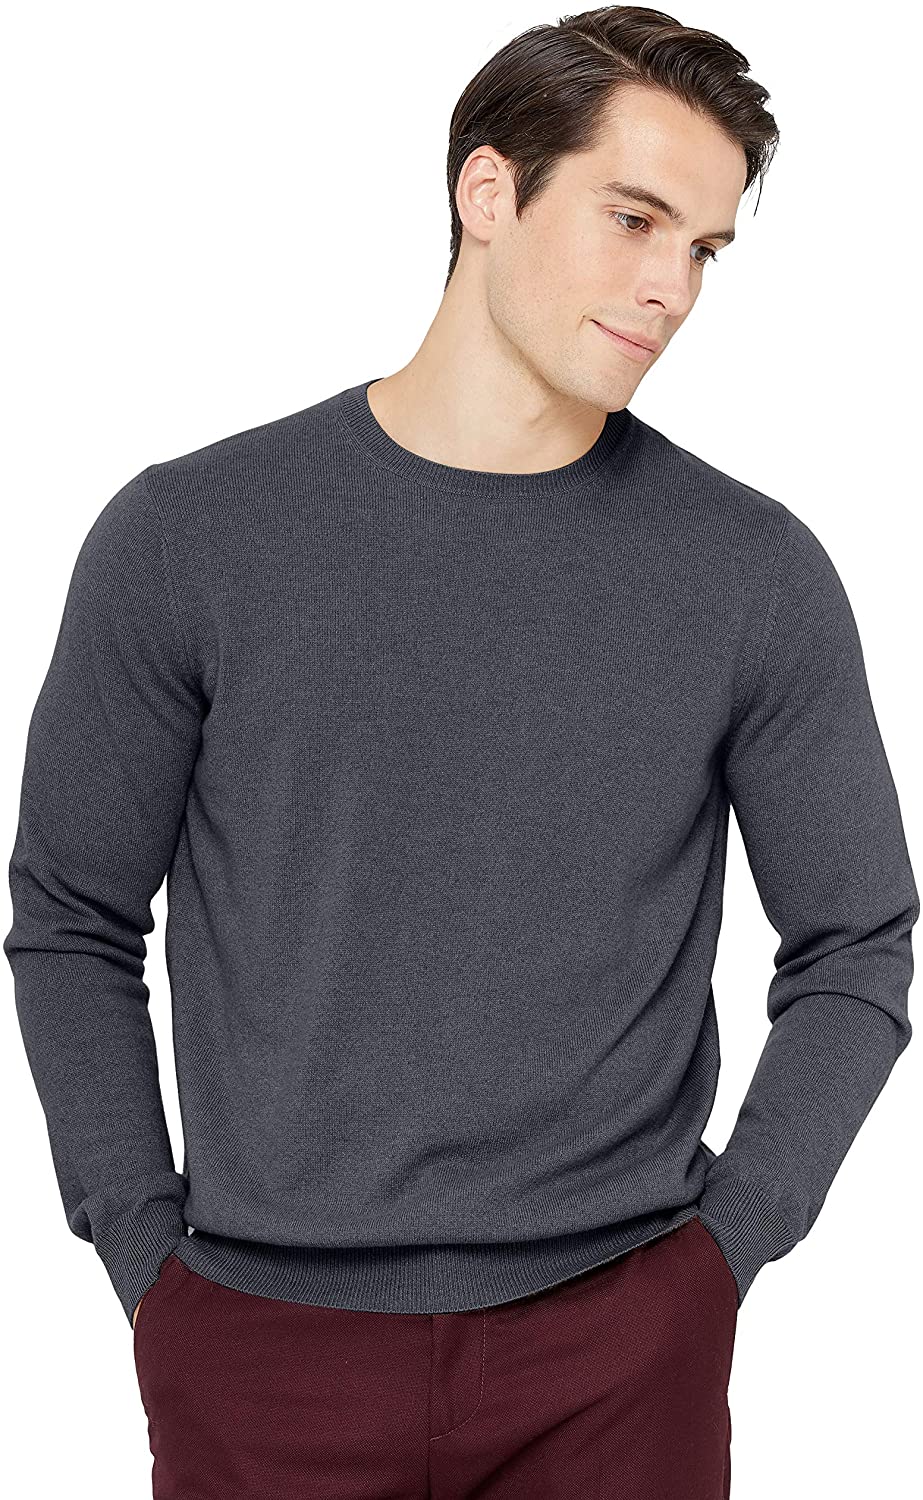 State Cashmere Men's Essential Crewneck Sweater 100% Pure Cashmere Classic Long Sleeve Pullover